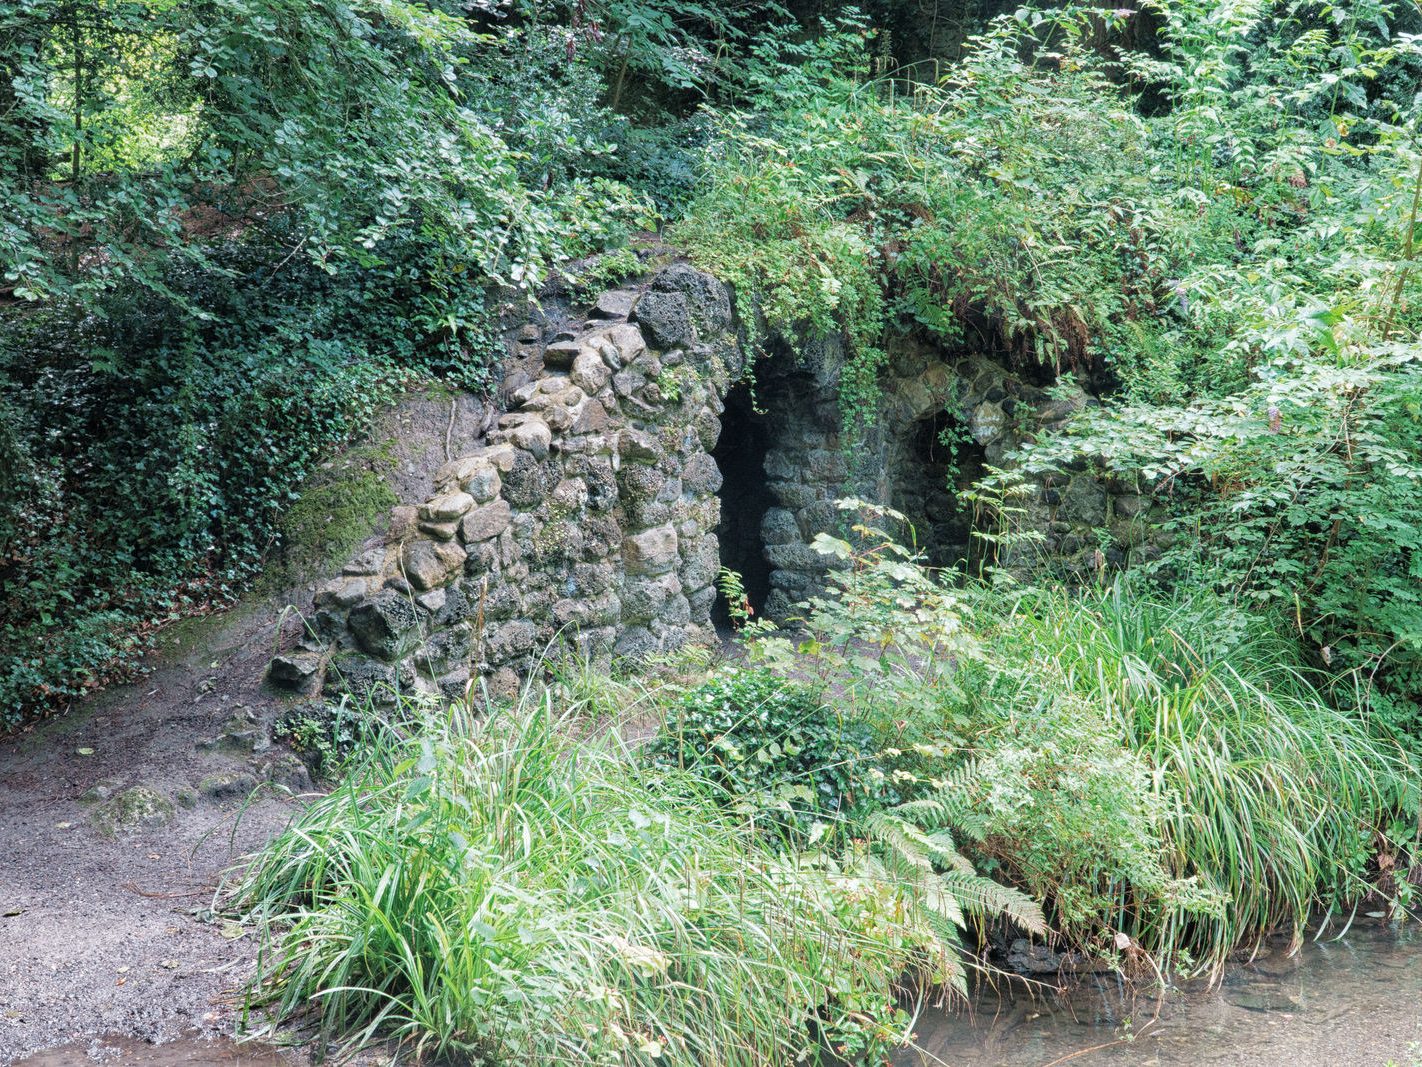 THE HERMIT'S CAVE AND NEARBY [ST ANNE'S PARK IN RAHENY] 008